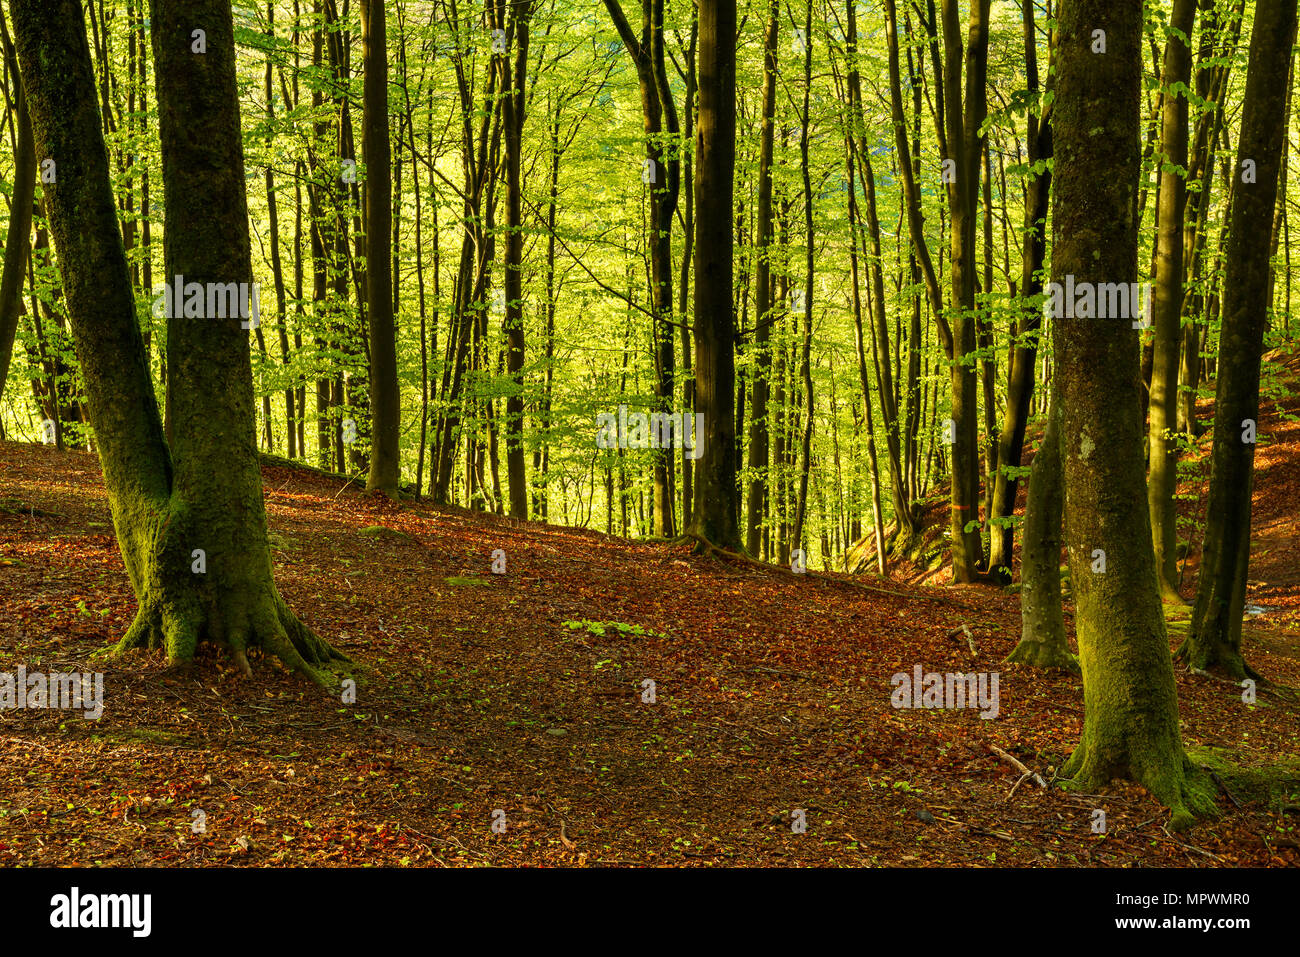 Lush and green beech forest in hilly terrain on a sunny spring morning. Soderasen national park in Sweden. Stock Photo